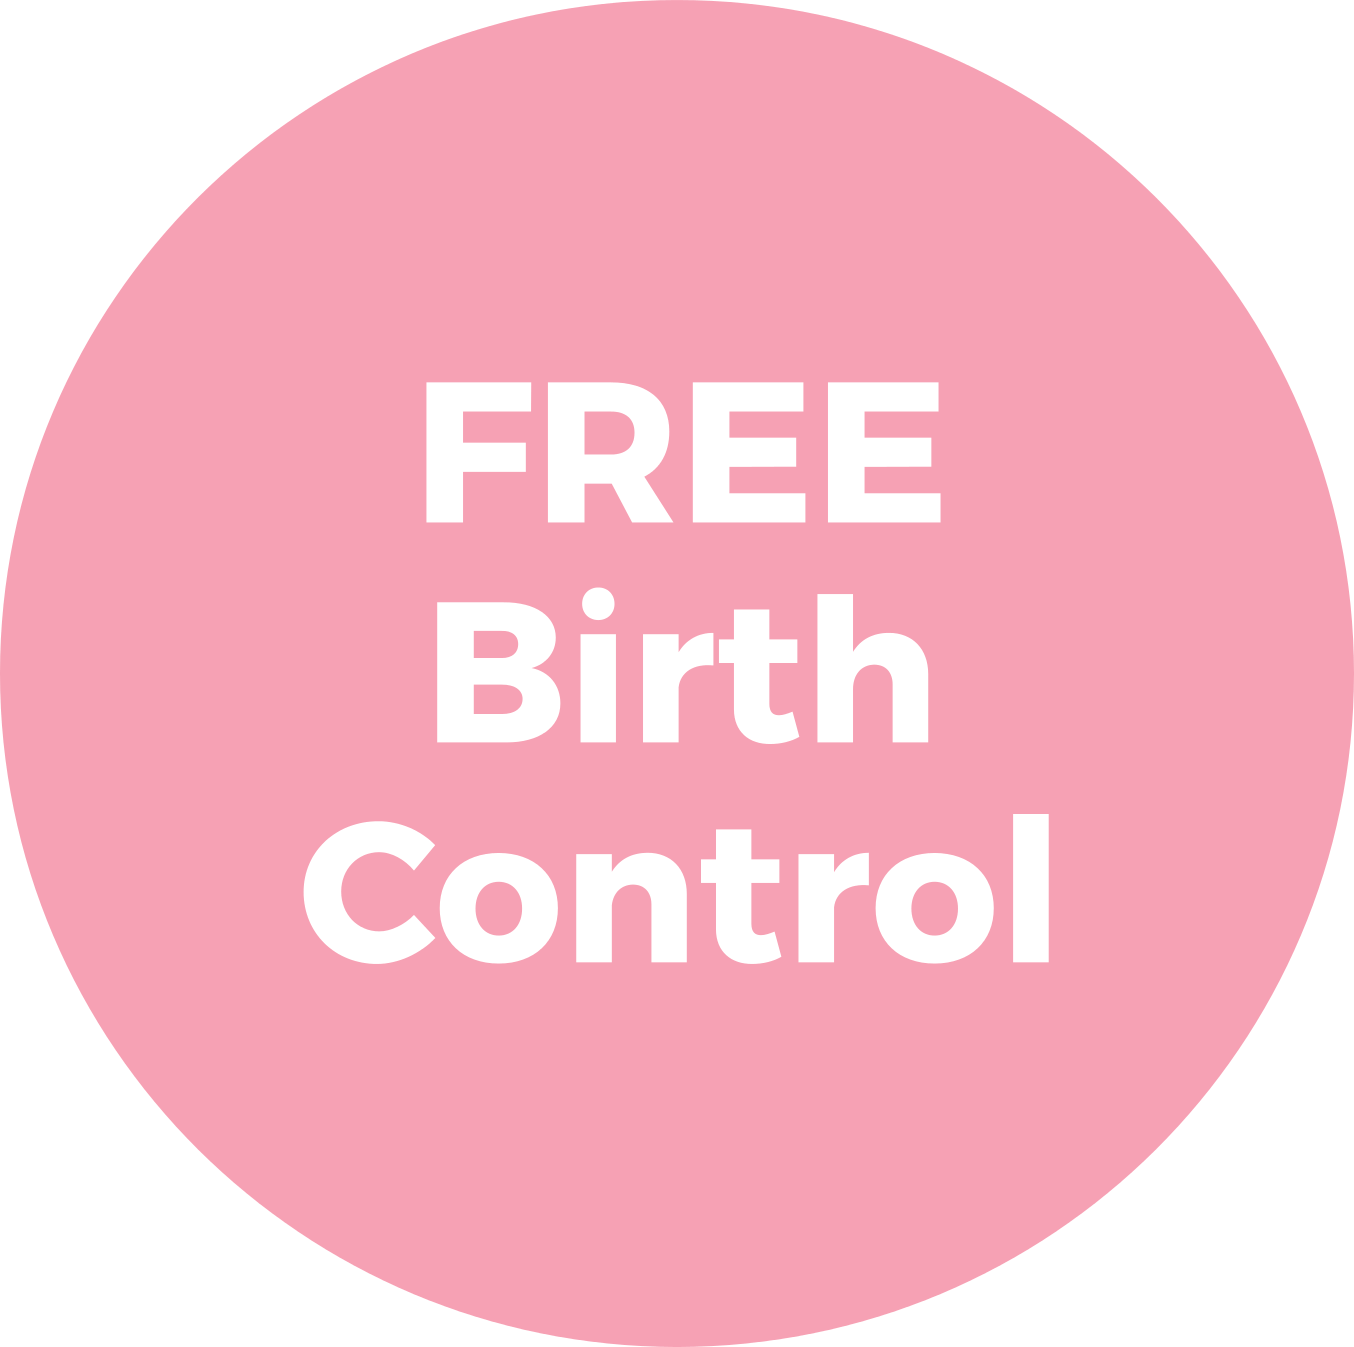 free birth control, family planning services, goals, life, contraceptives and contraception